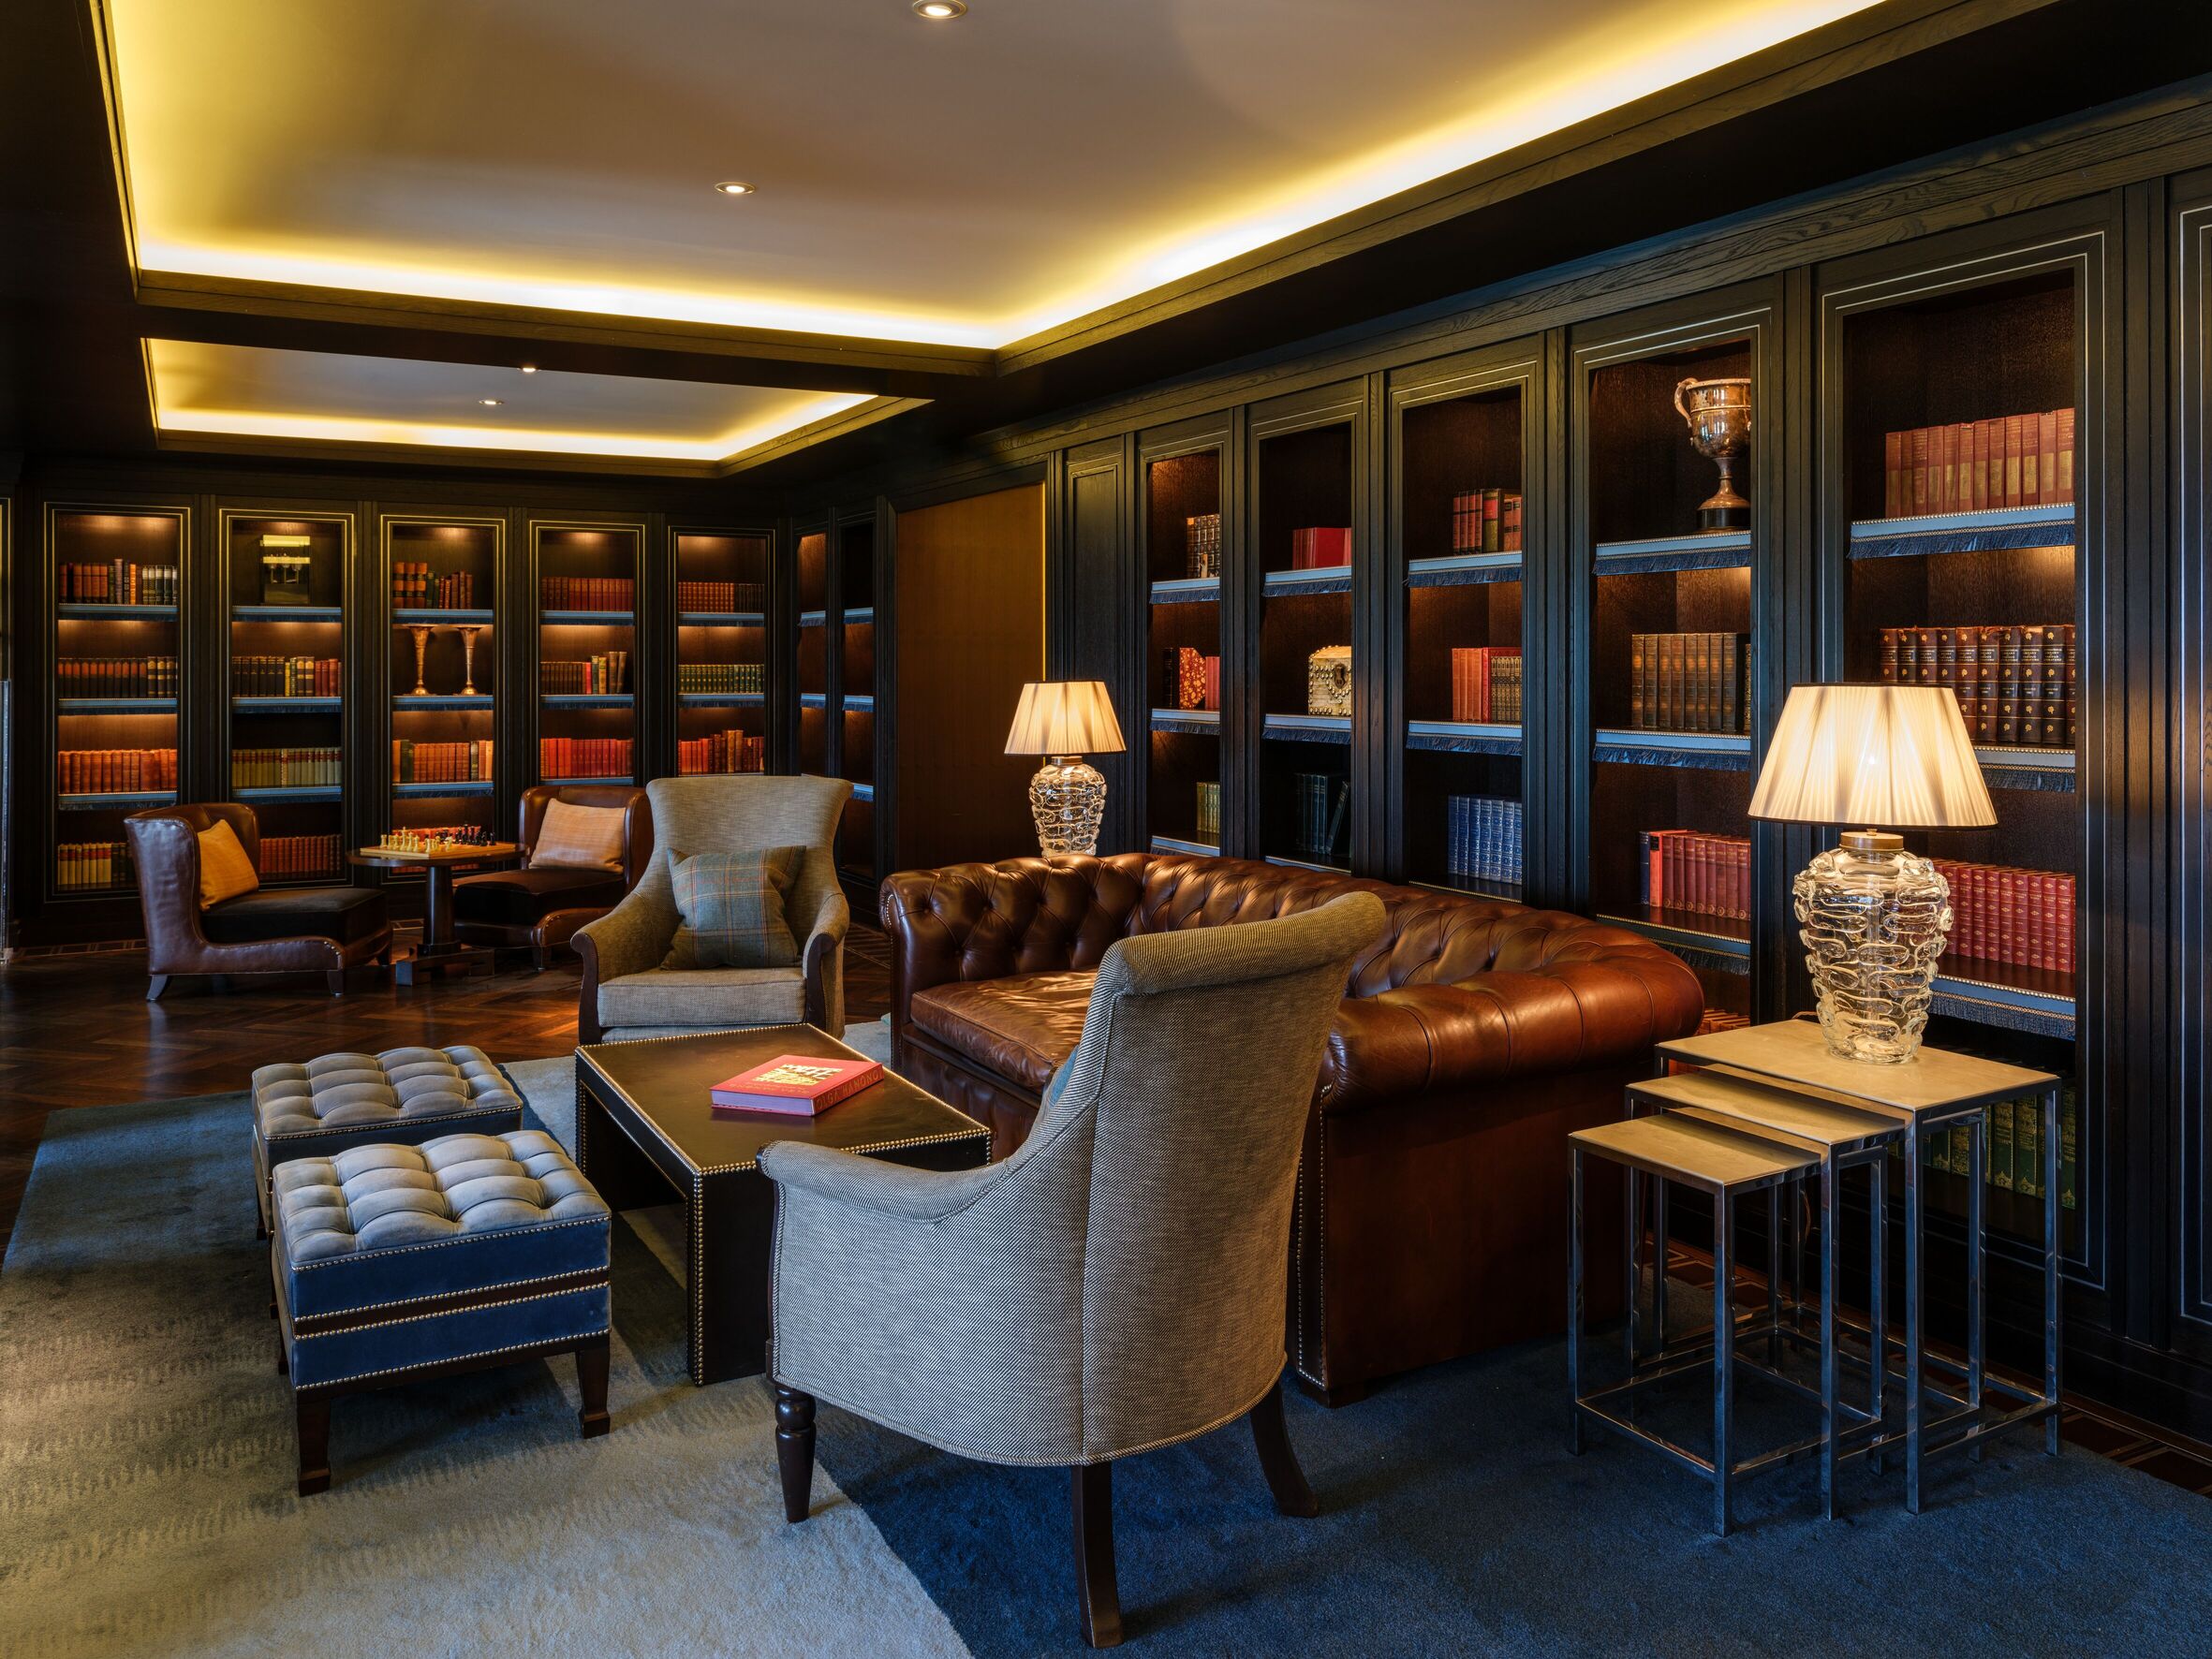 The Europe Hotel Library